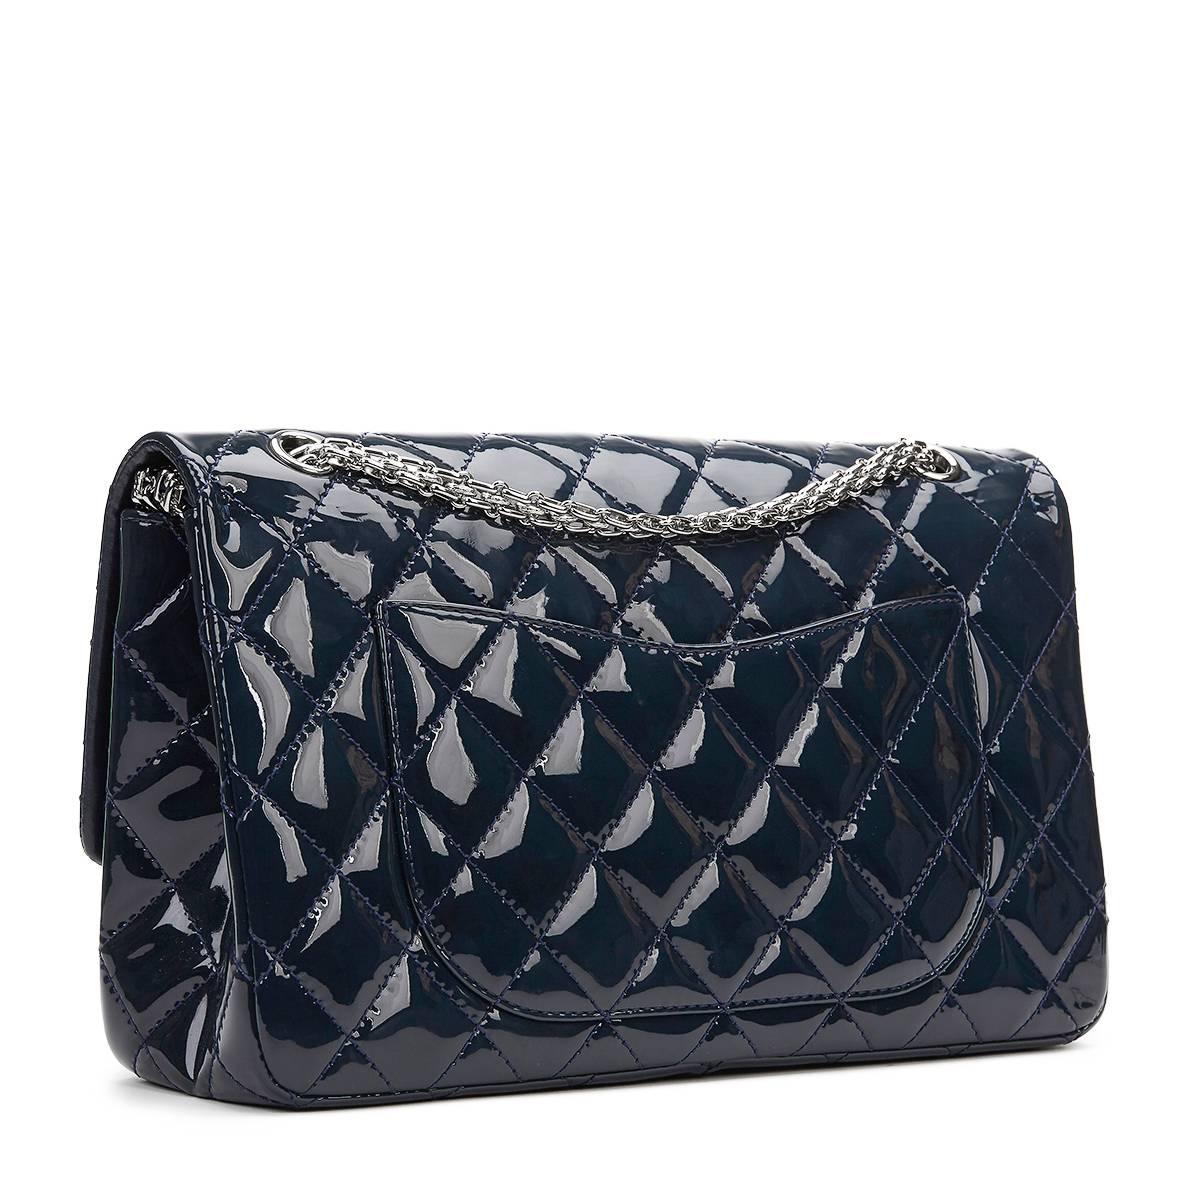 2010s Chanel Navy Quilted Patent Leather 2.55 Reissue 227 Double Flap Bag 1